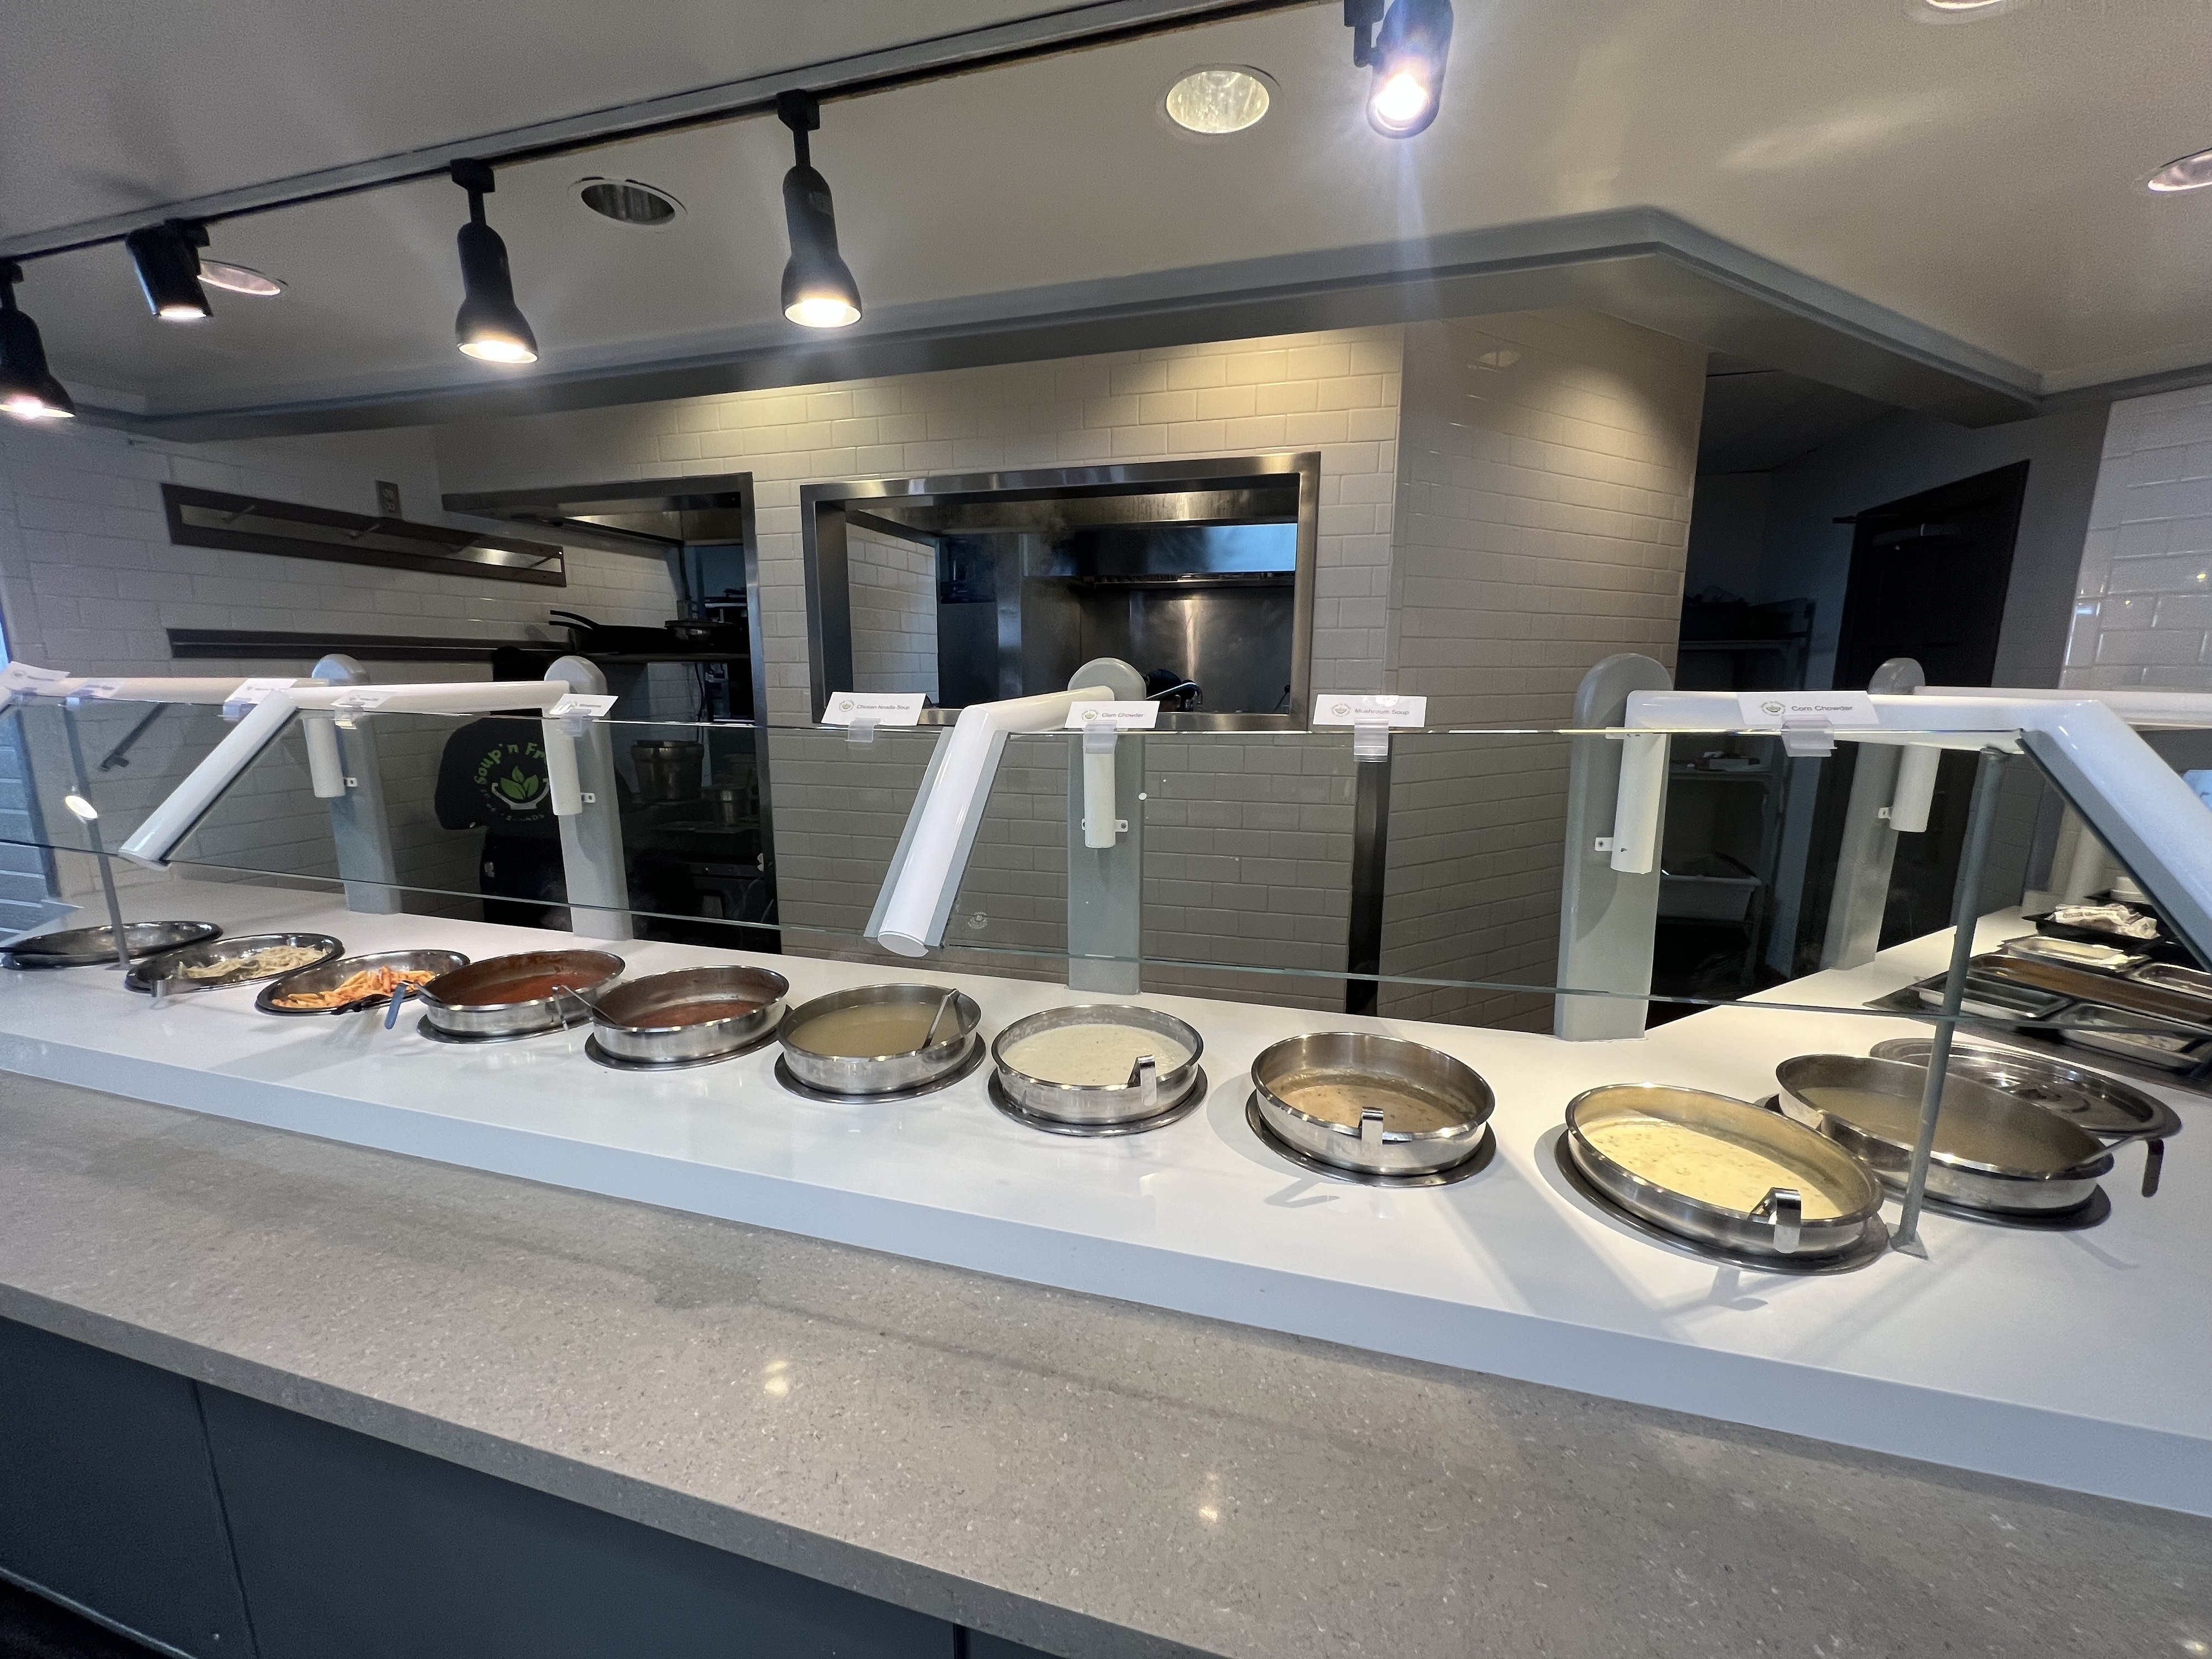 A cafeteria counter with various trays of food behind a protective glass barrier